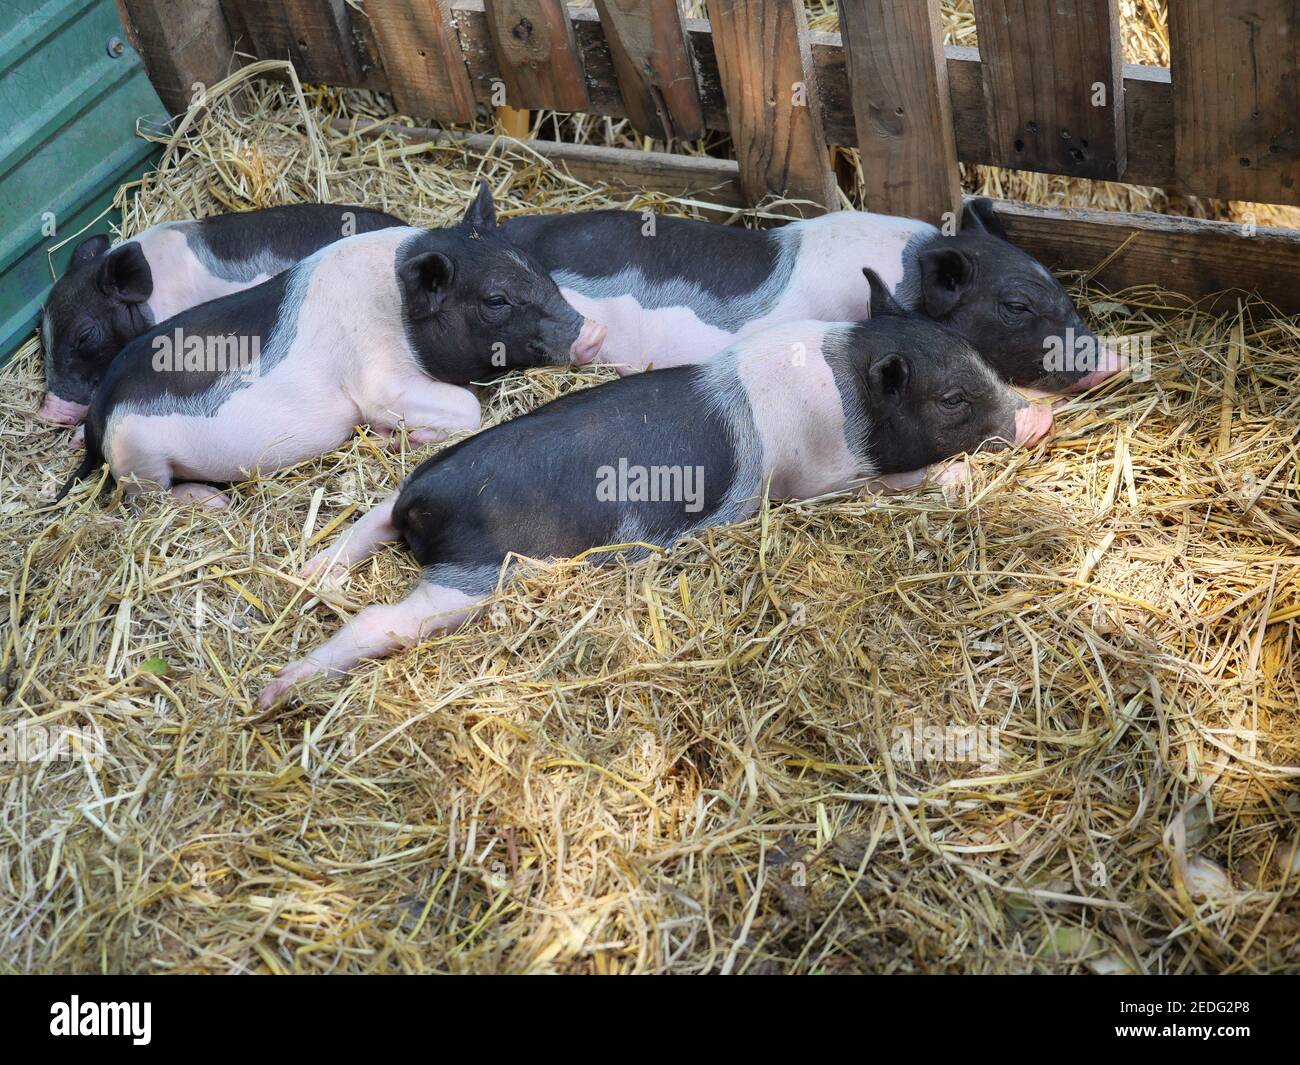 Four baby Vietnamese Pot bellied pigs sleeping on the yellow straw in the stall at farm Stock Photo